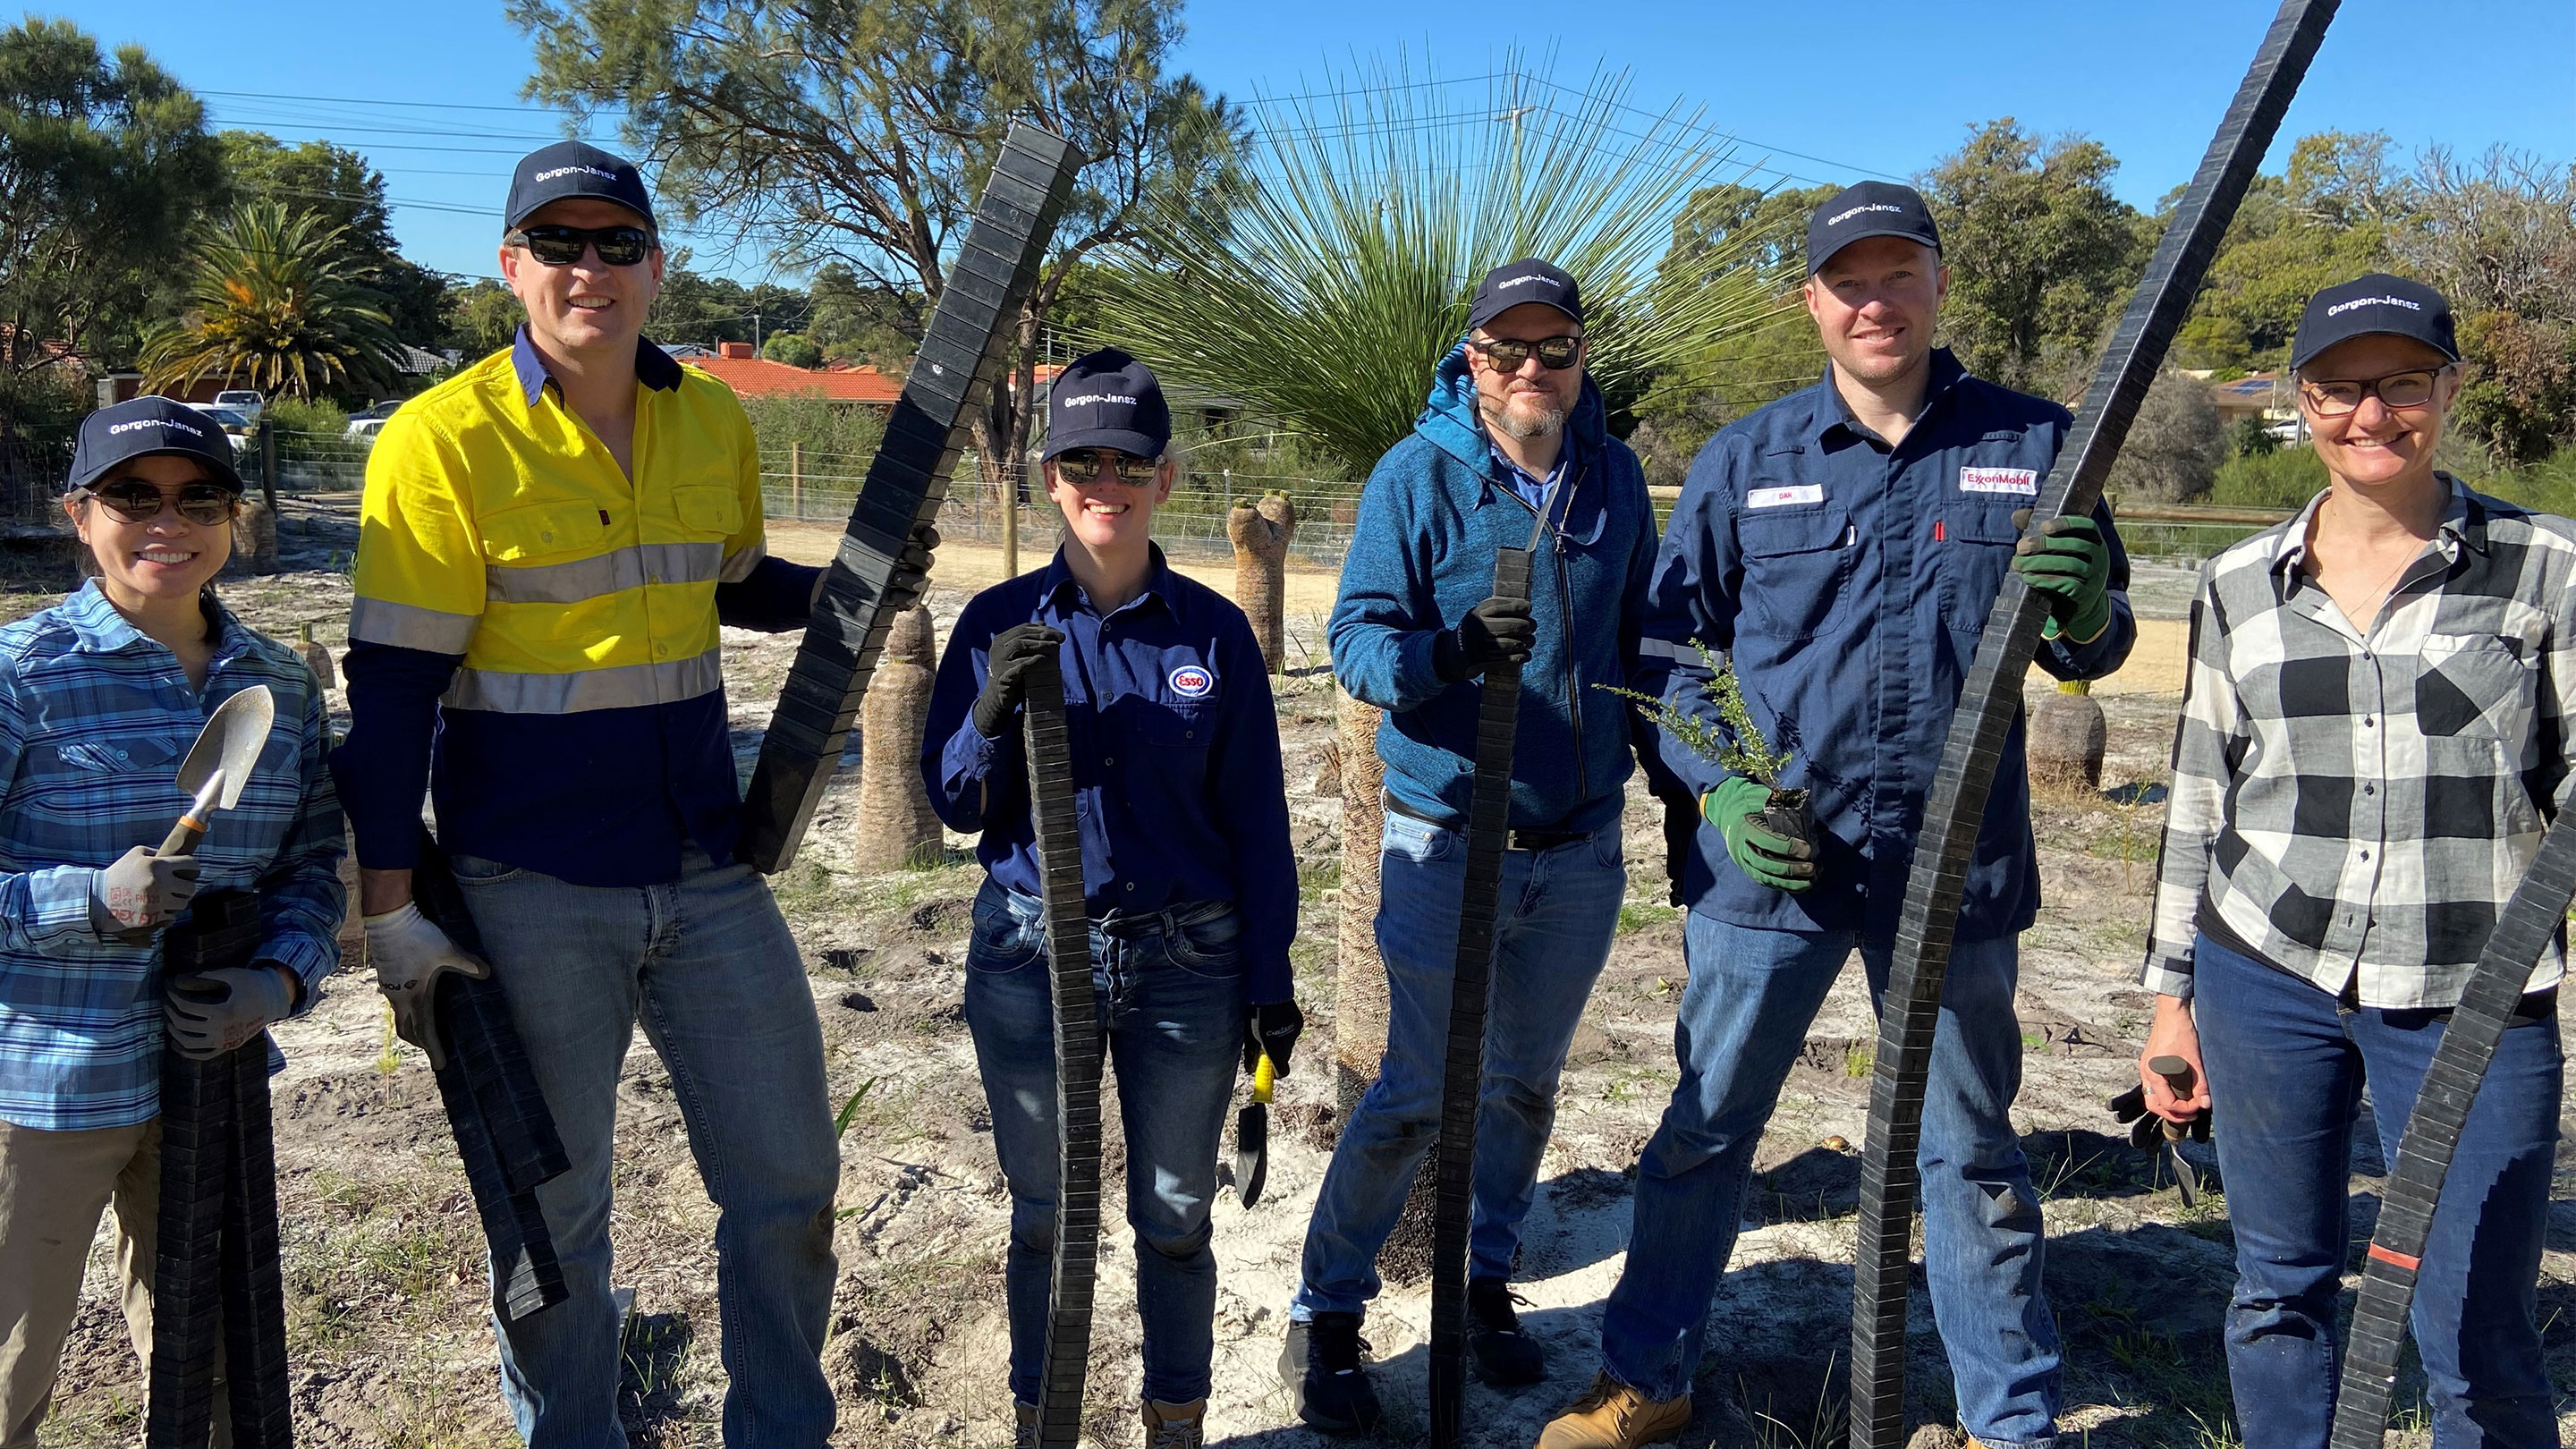 Image As well as supporting Conservation Volunteers with funding to run the event, ExxonMobil Australia had a team participate in the tree-planting event in Perth.